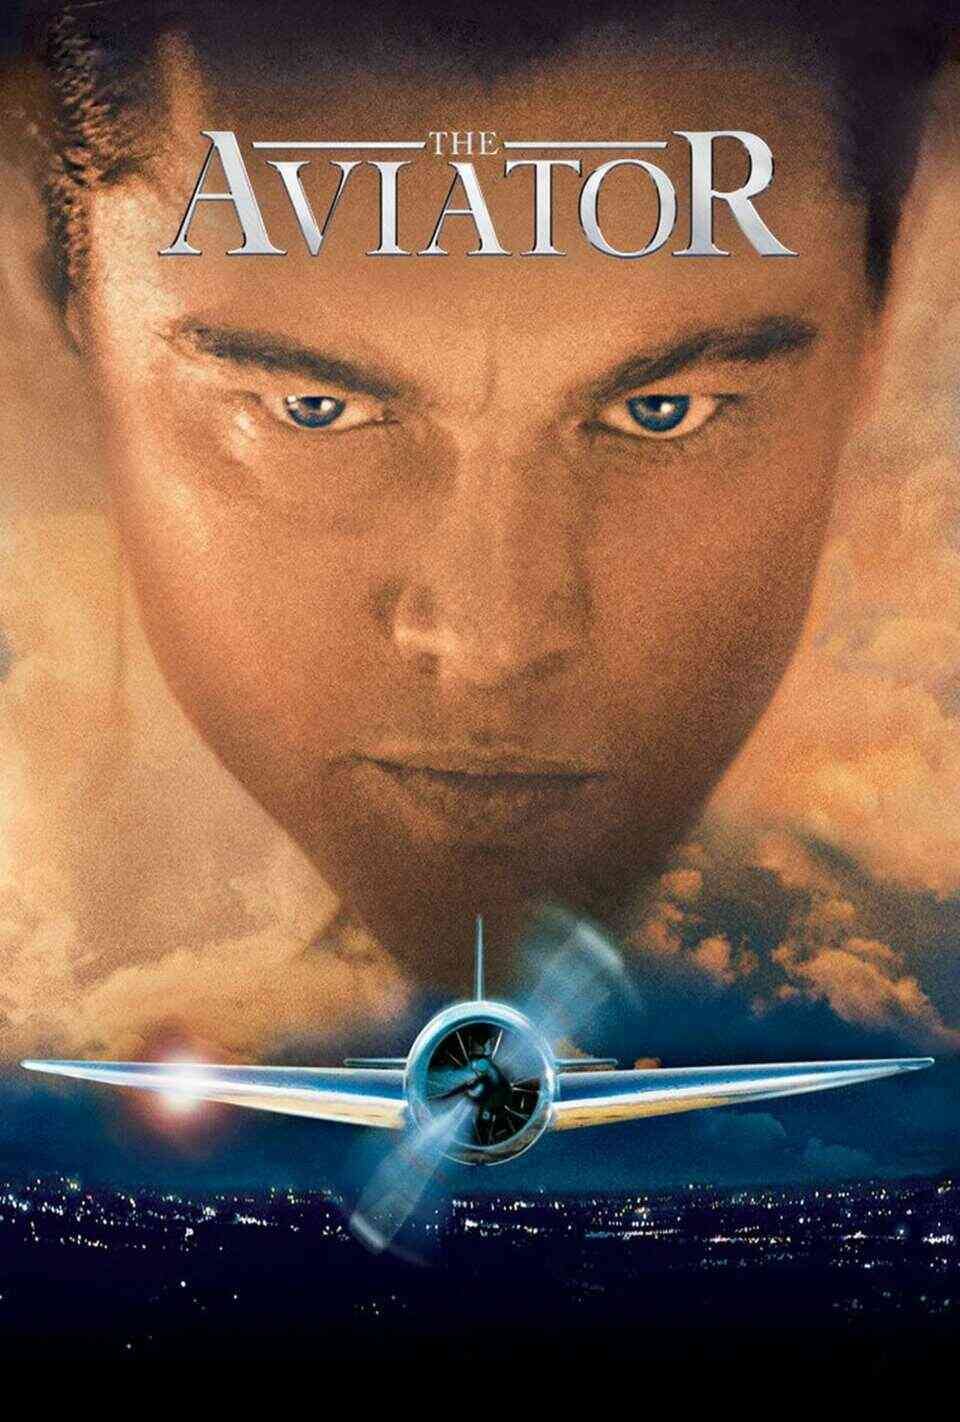 Read The Aviator screenplay (poster)